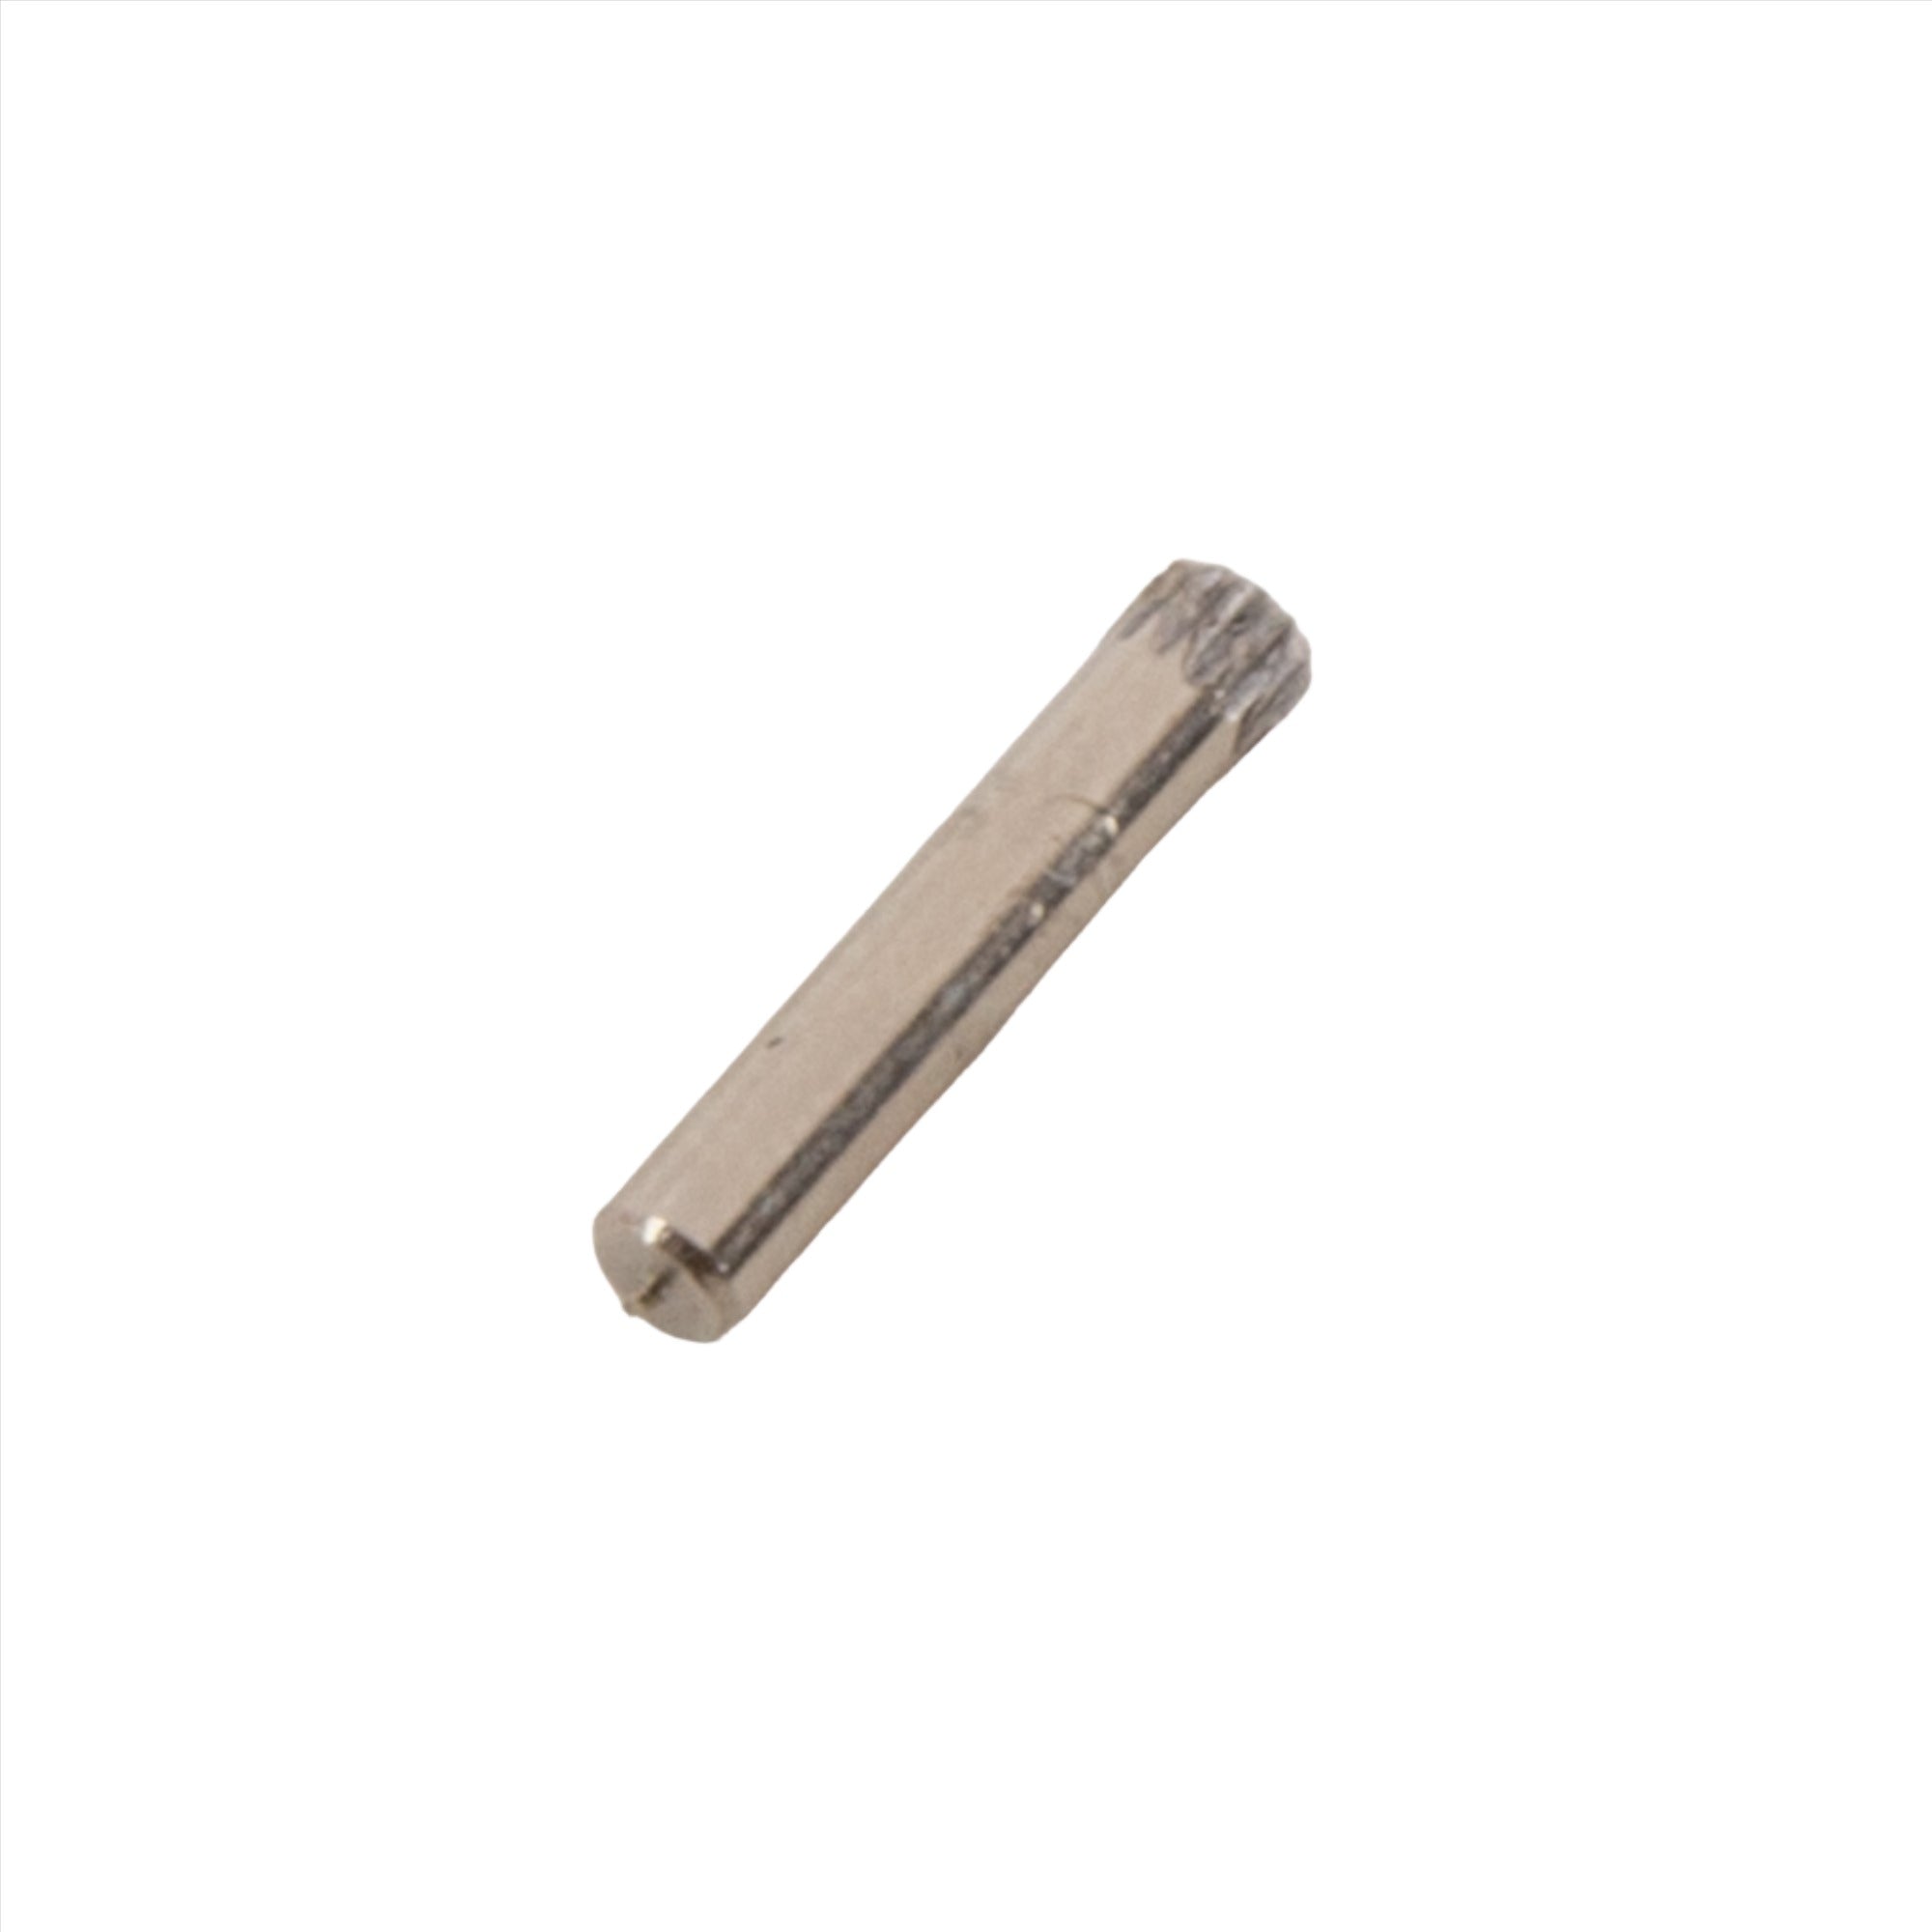 Replacement handle pin for starting blocks